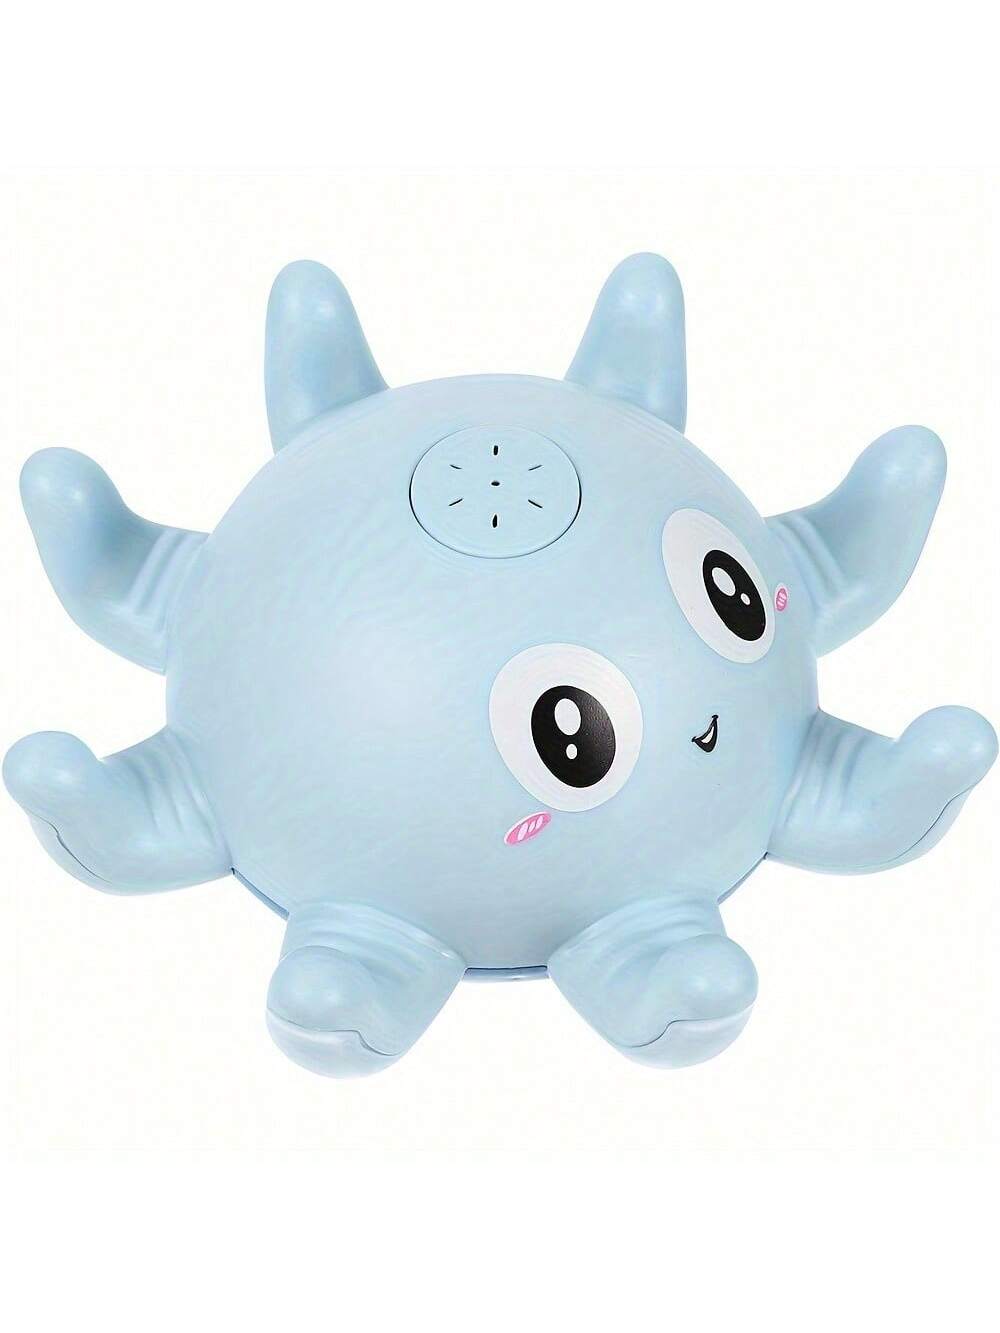 1pc Baby Bathtub Toy, Automatic Induction Water Spray Electric Octopus Toy , Water Play, Water Spray, Swimming Pool Bathroom Toy, Sprinkler Bath Toy Interactive Bath Toy, Light Up Bath Toy(Battery Not Included)